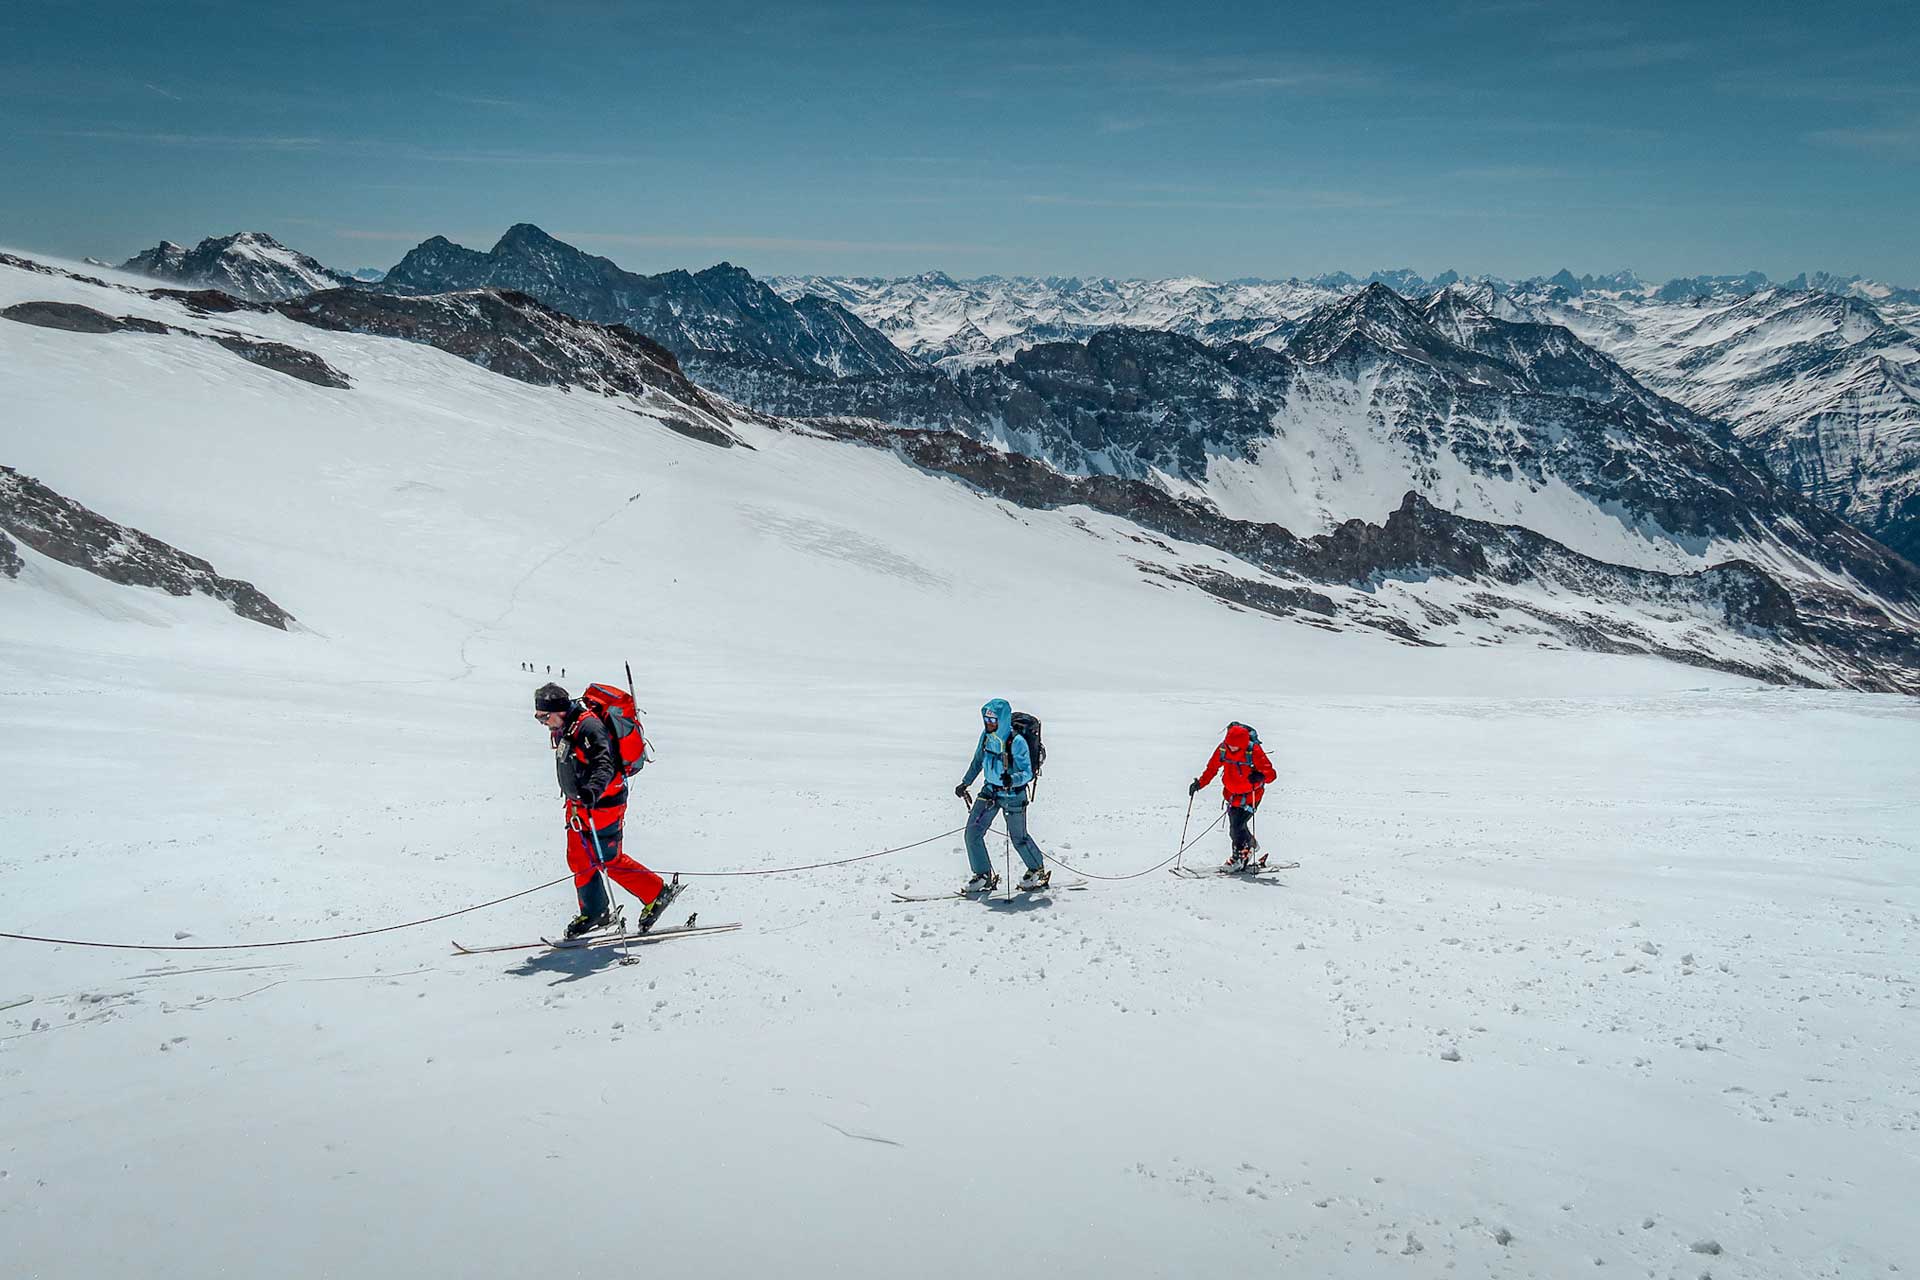 Ski touring guided tour to Grossveendiger with Kofler sports mountain guides